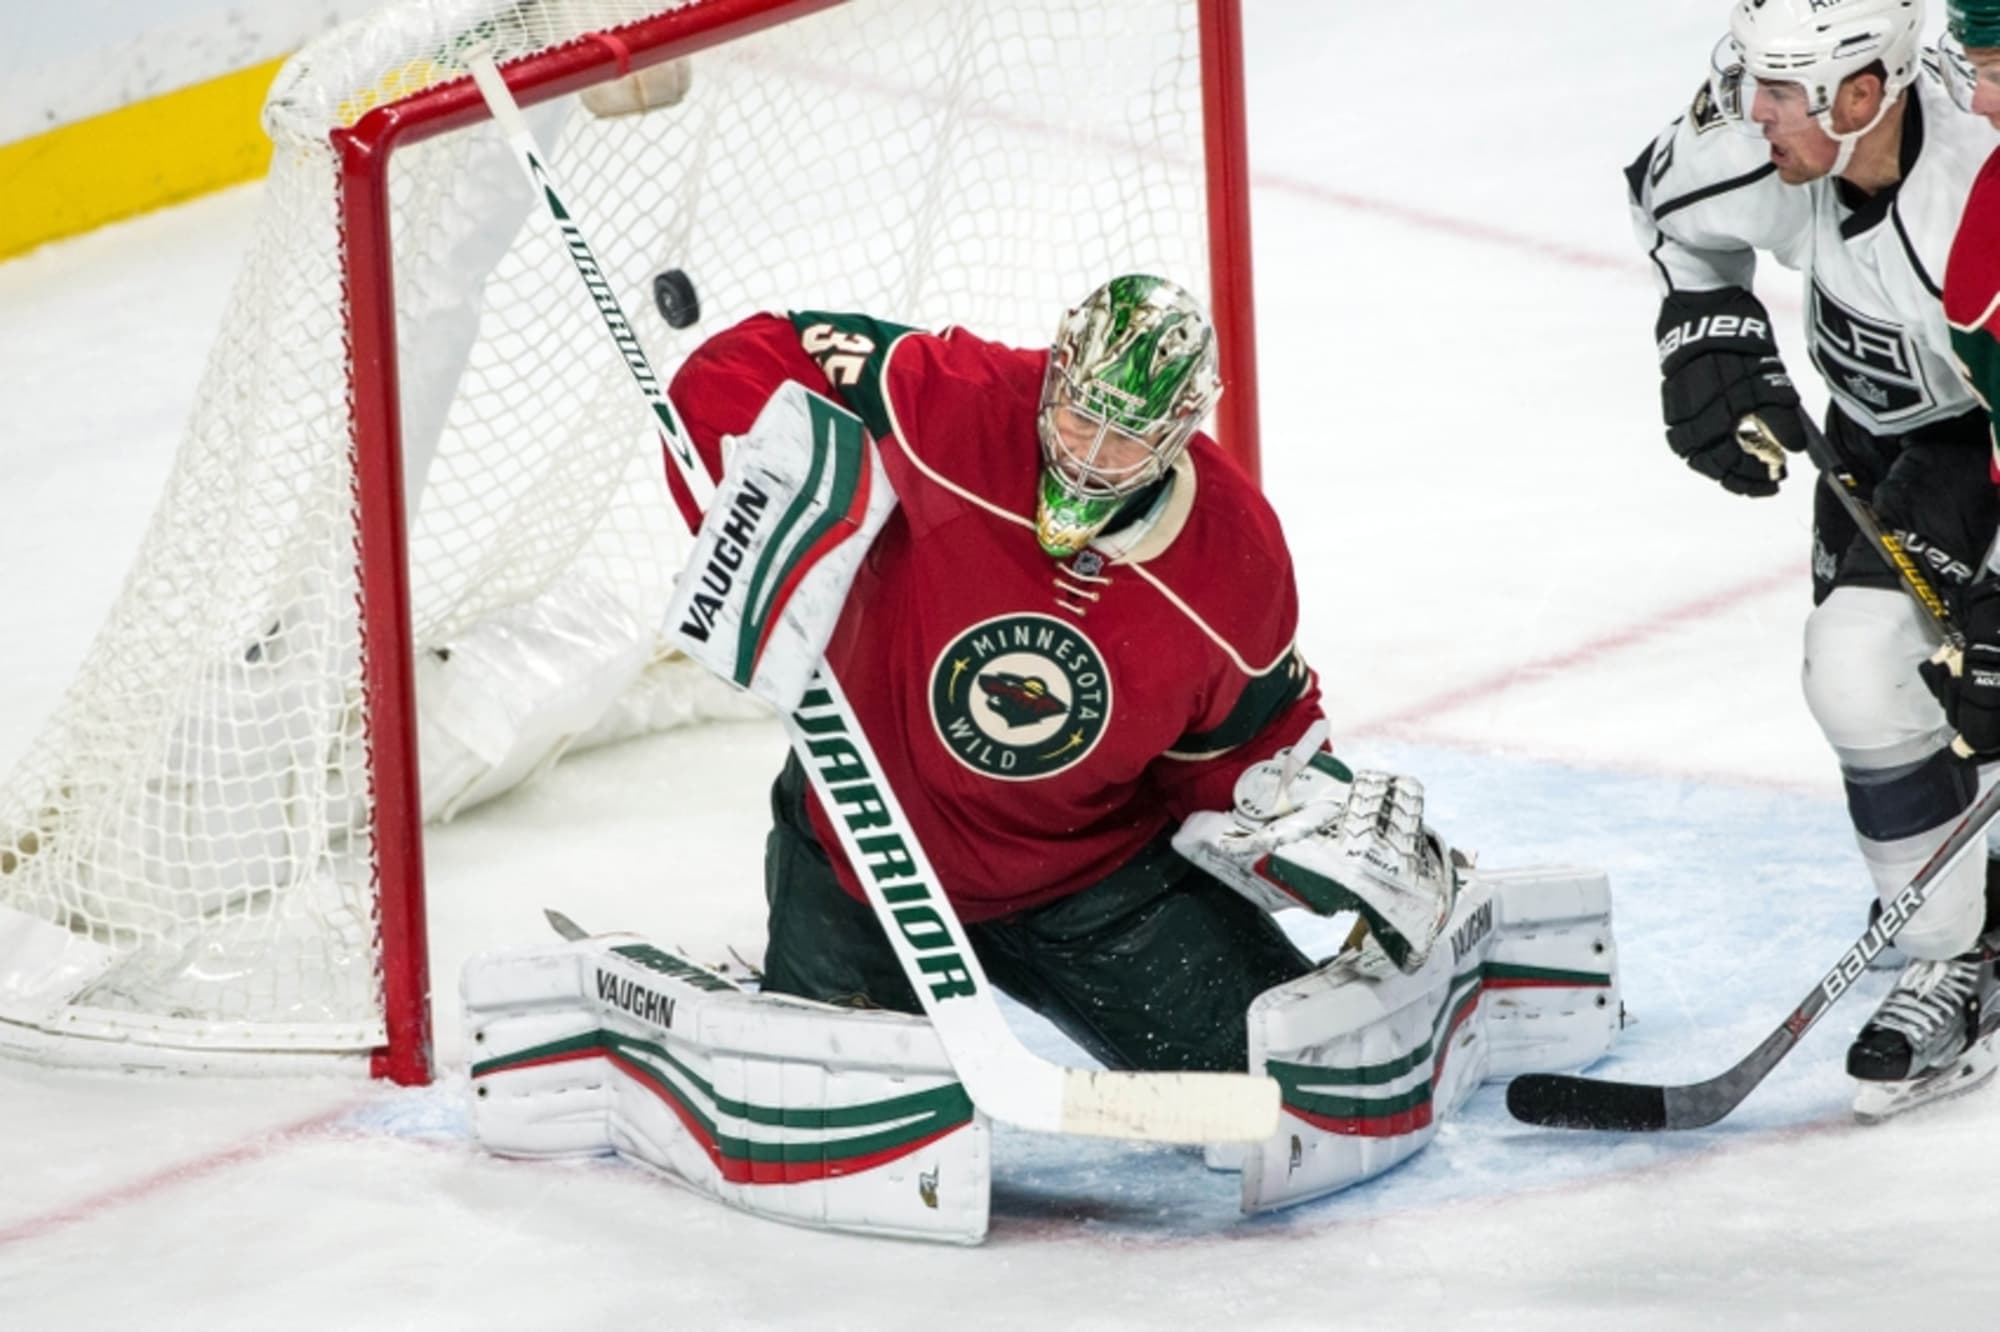 Kuemper looking forward to hometown start, more playing time with Wild